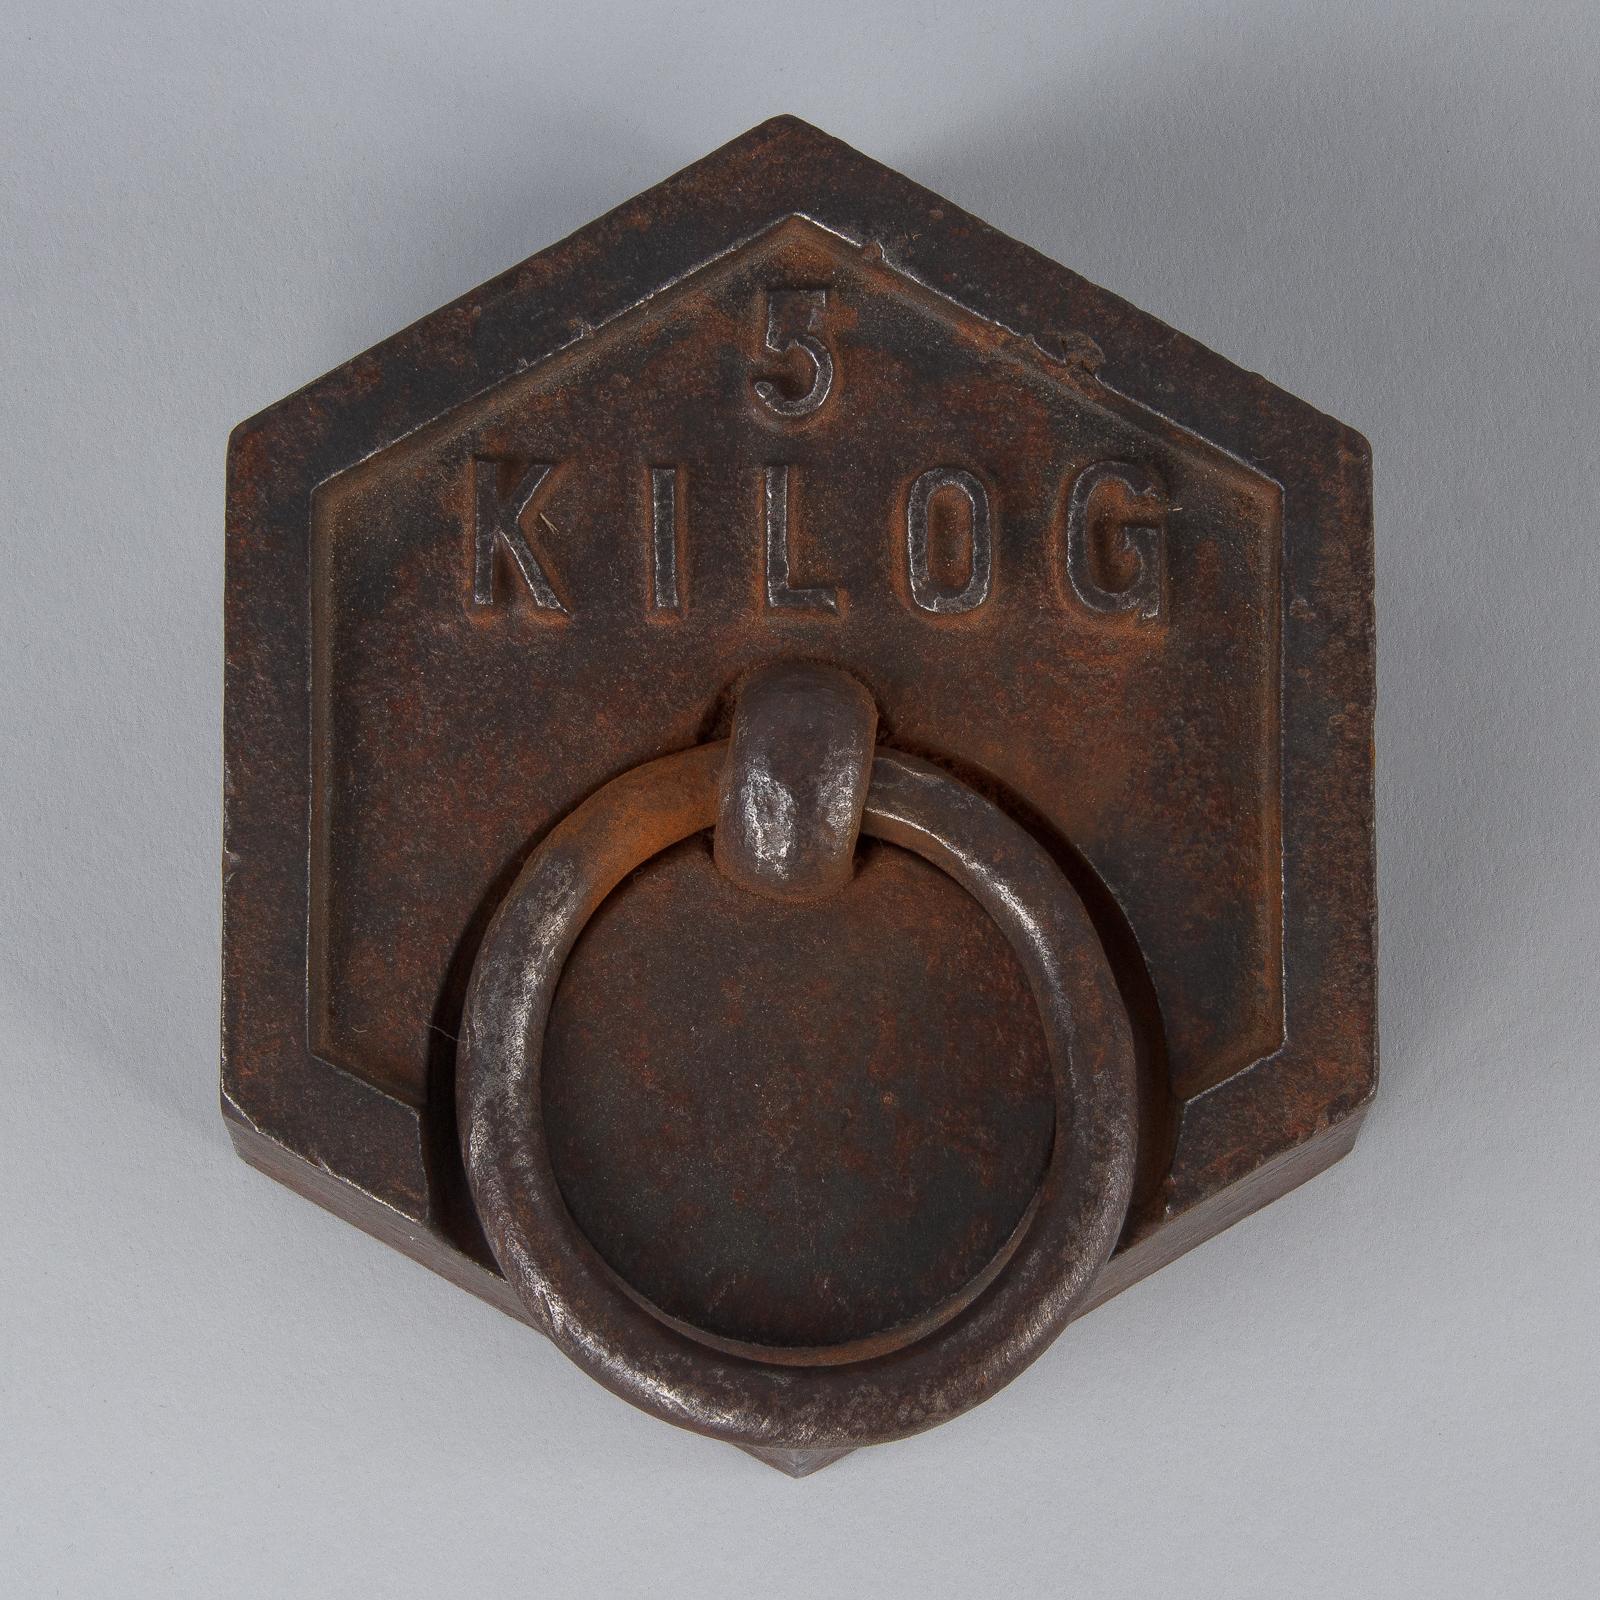 Industrial 5 Kilogram Iron Scale Weight, France, Early 1900s